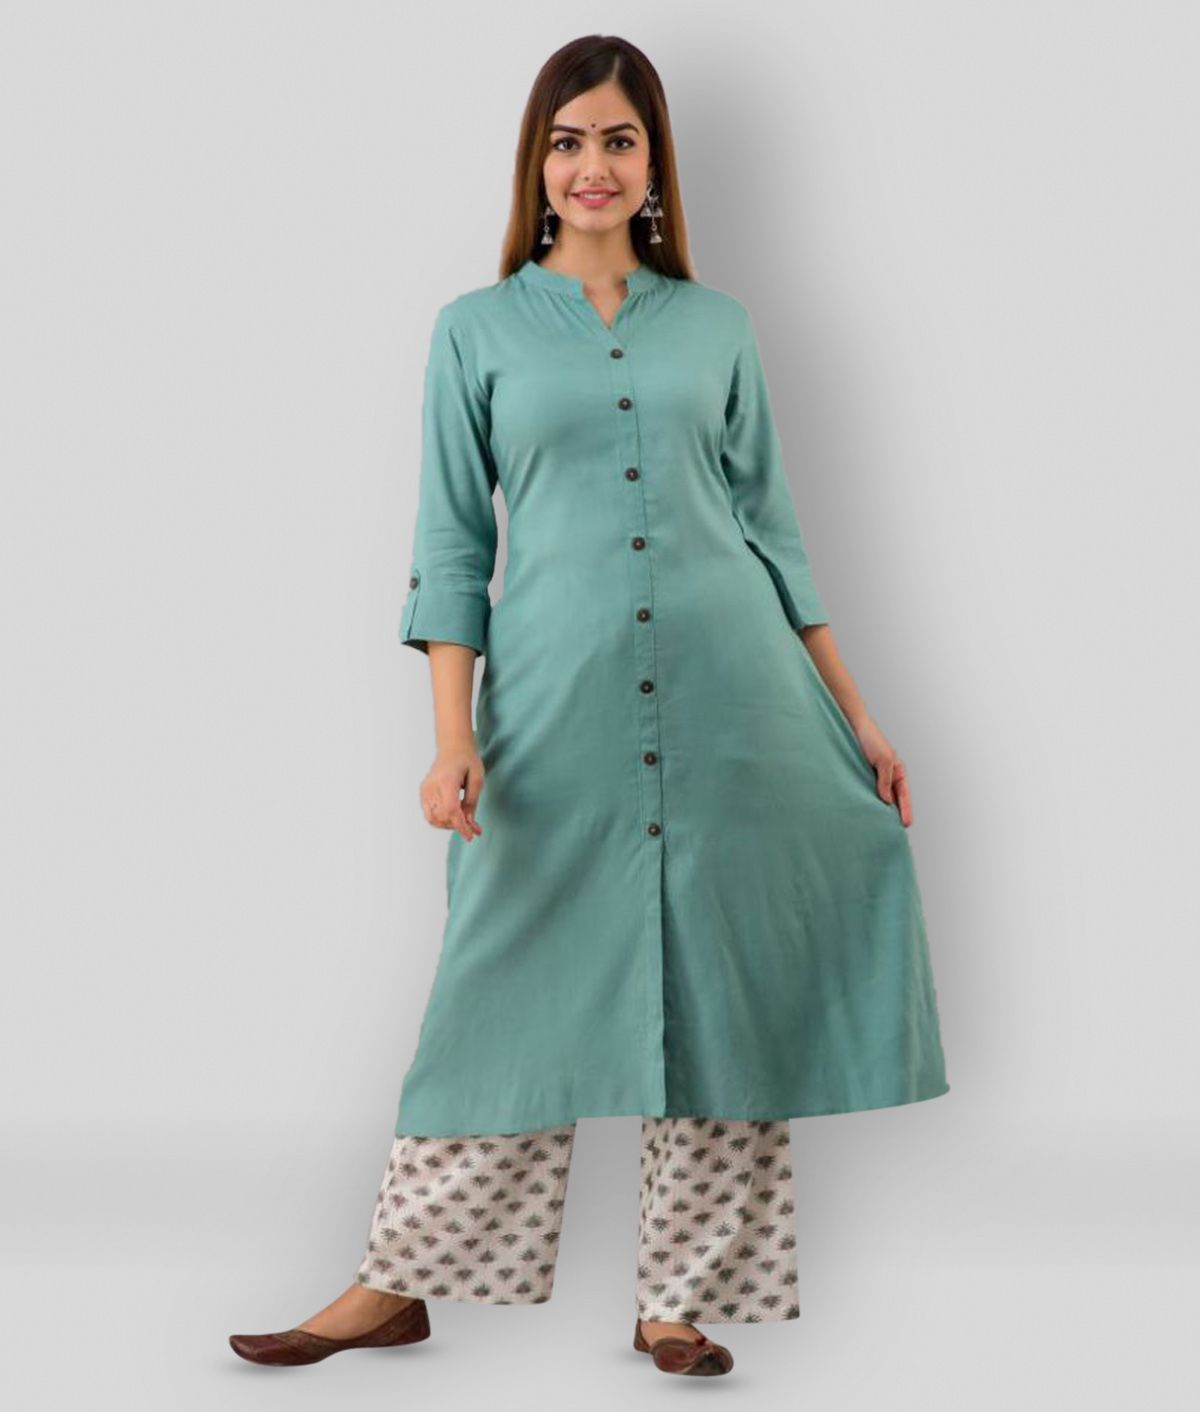     			MAUKA - Turquoise Front Slit Rayon Women's Stitched Salwar Suit ( Pack of 1 )